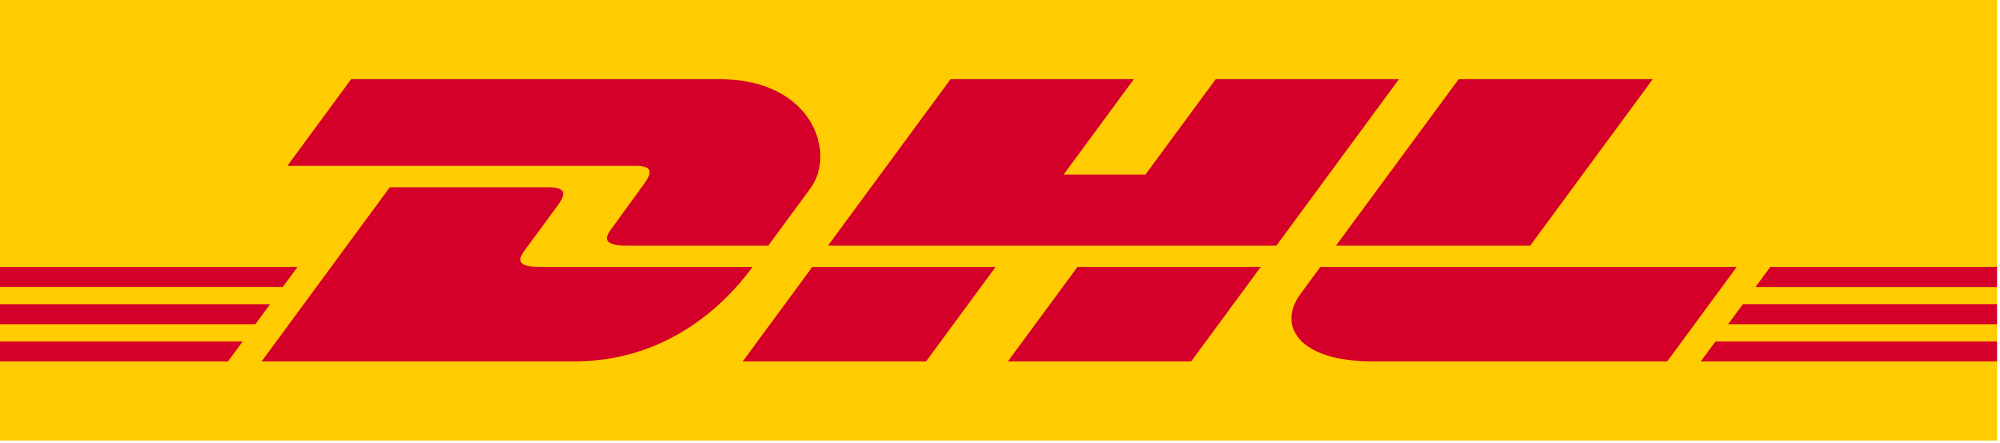 Maroon and Yellow Logo - File:DHL Logo.svg - Wikimedia Commons